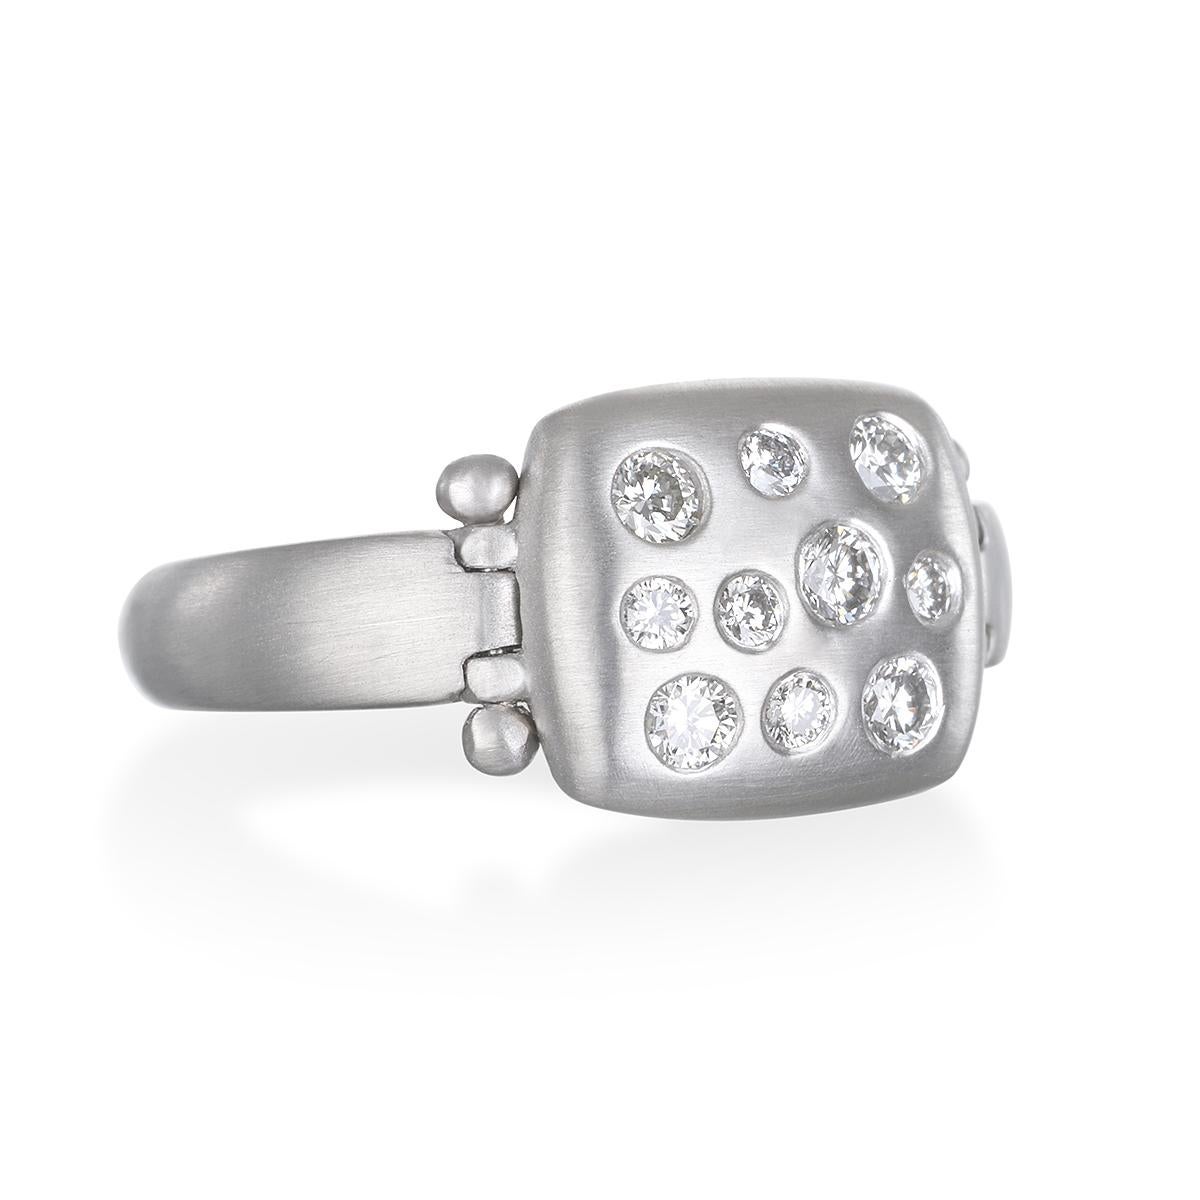 A modern-day take on the Signet Ring, Faye Kim's Platinum Diamond Hinged Chiclet Ring sparkles with bright, white burnished diamonds. With its flattering chiclet or antique cushion shape, it's a great look worn on any finger and can be stacked with